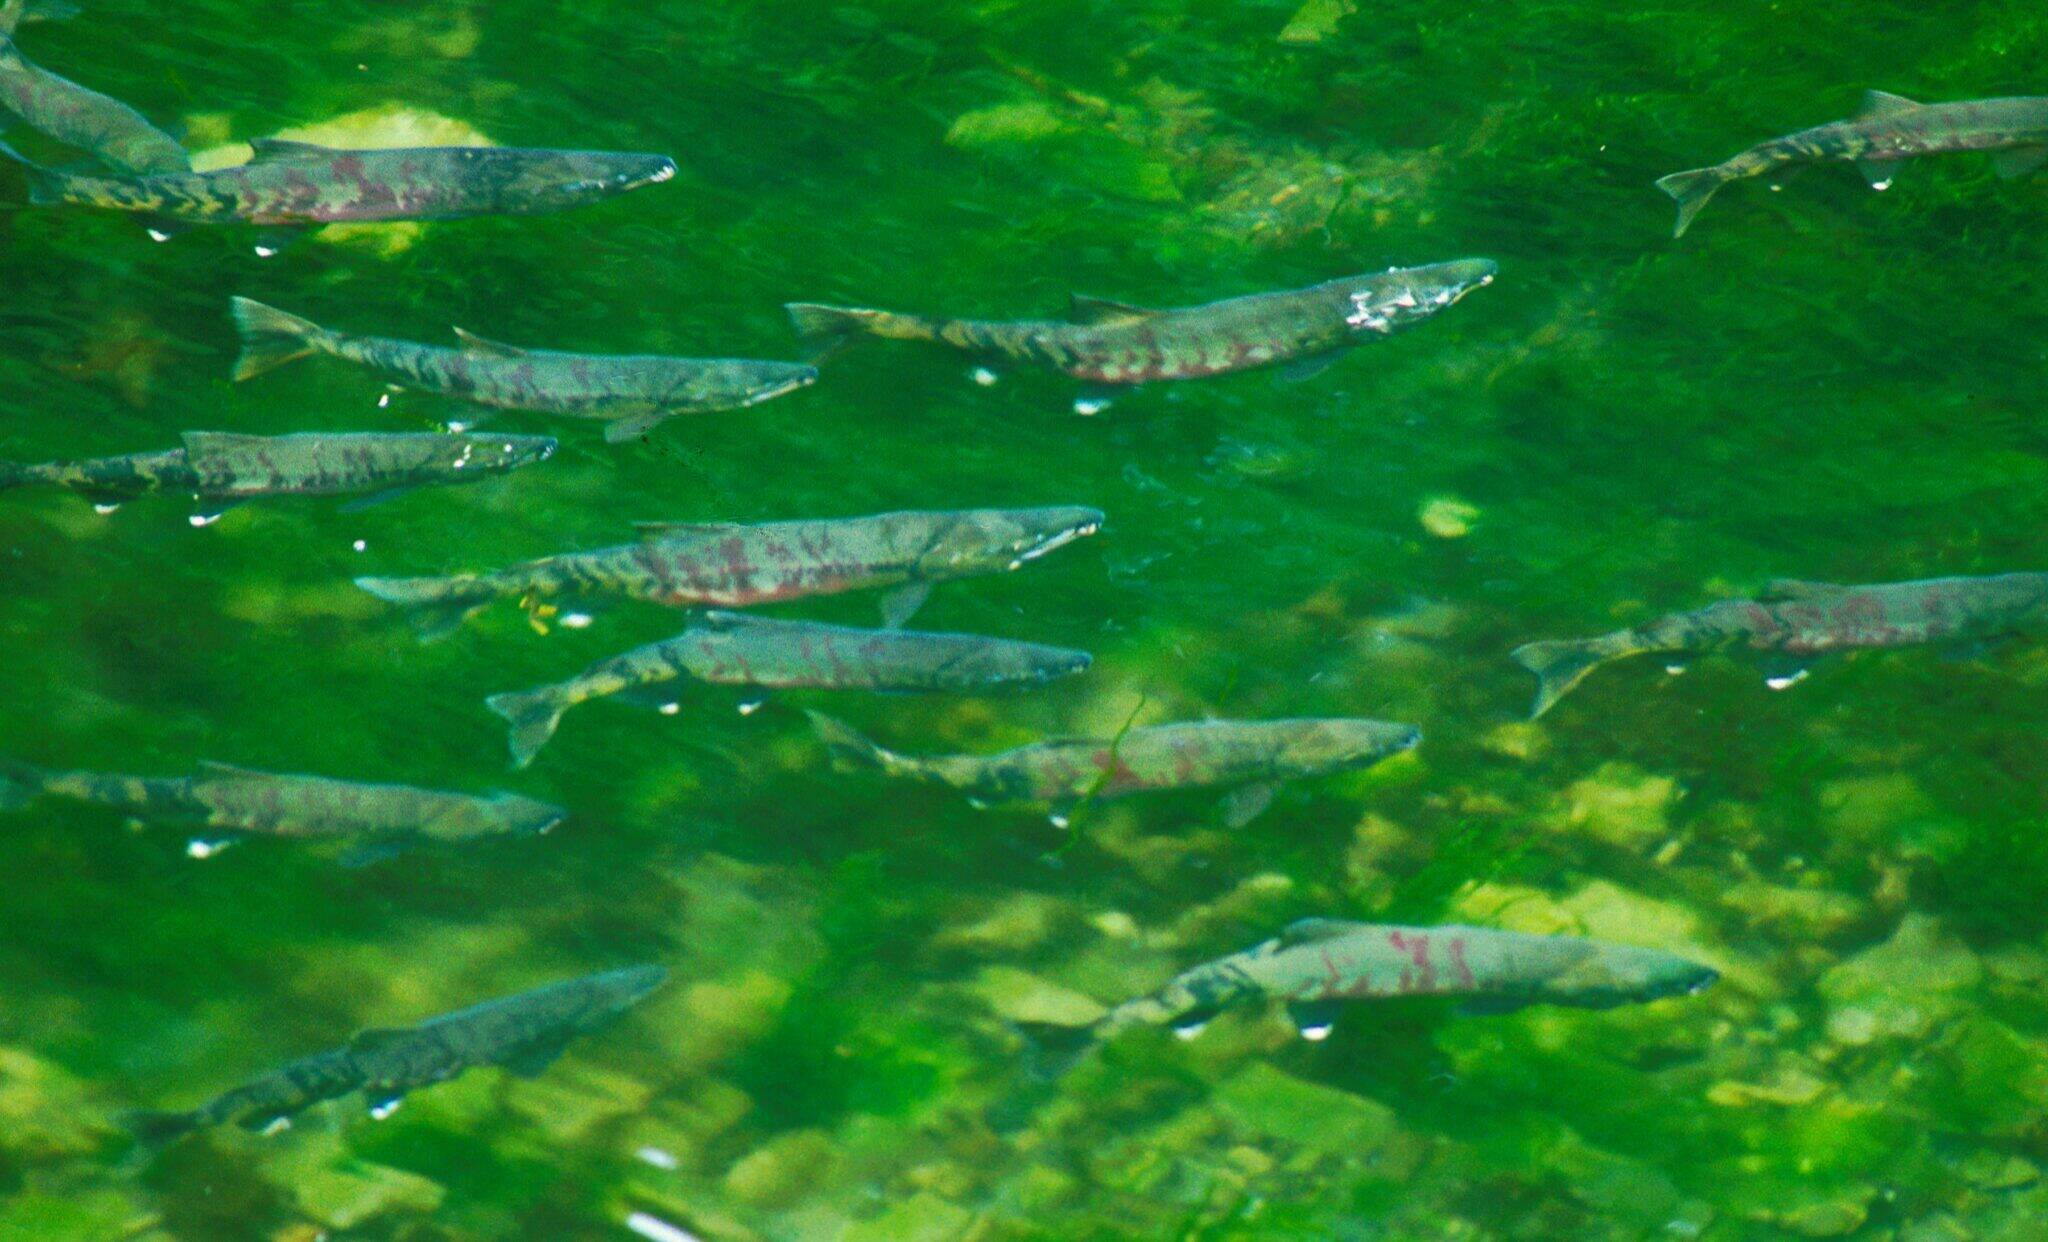 Spawning chum salmon swim in 1990 in Kitoi Bay near Kodiak. A newly released task force report says research should be conducted in a holistic way that considers the complete life cycles and geographic ranges of salmon runs. (David Csepp/NOAA Alaska Fisheries Science Center)